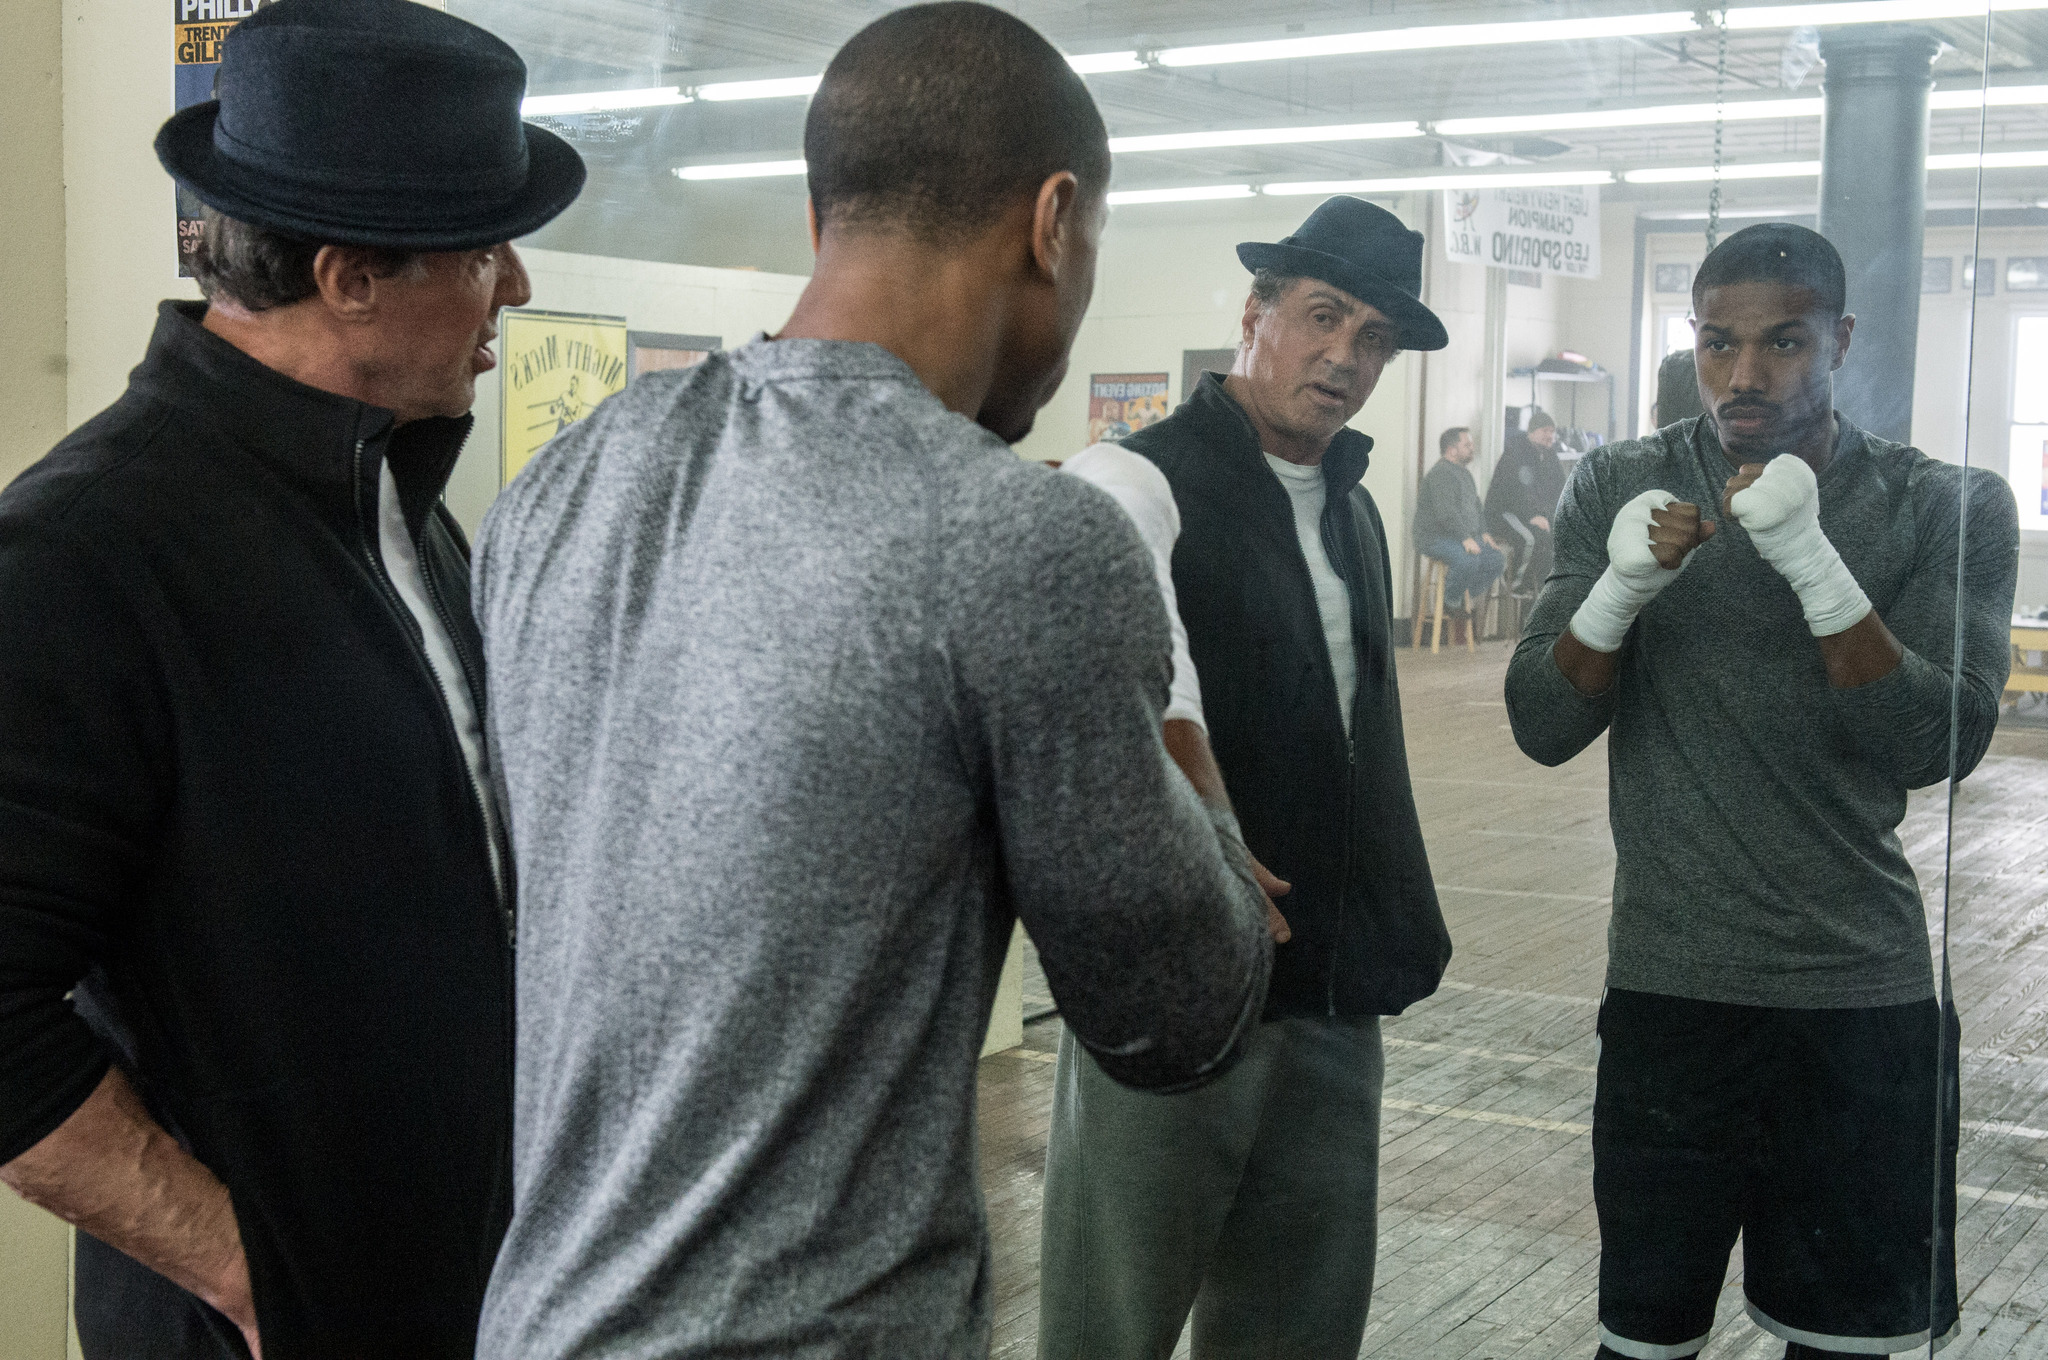 Still of Sylvester Stallone and Michael B. Jordan in Creed (2015)